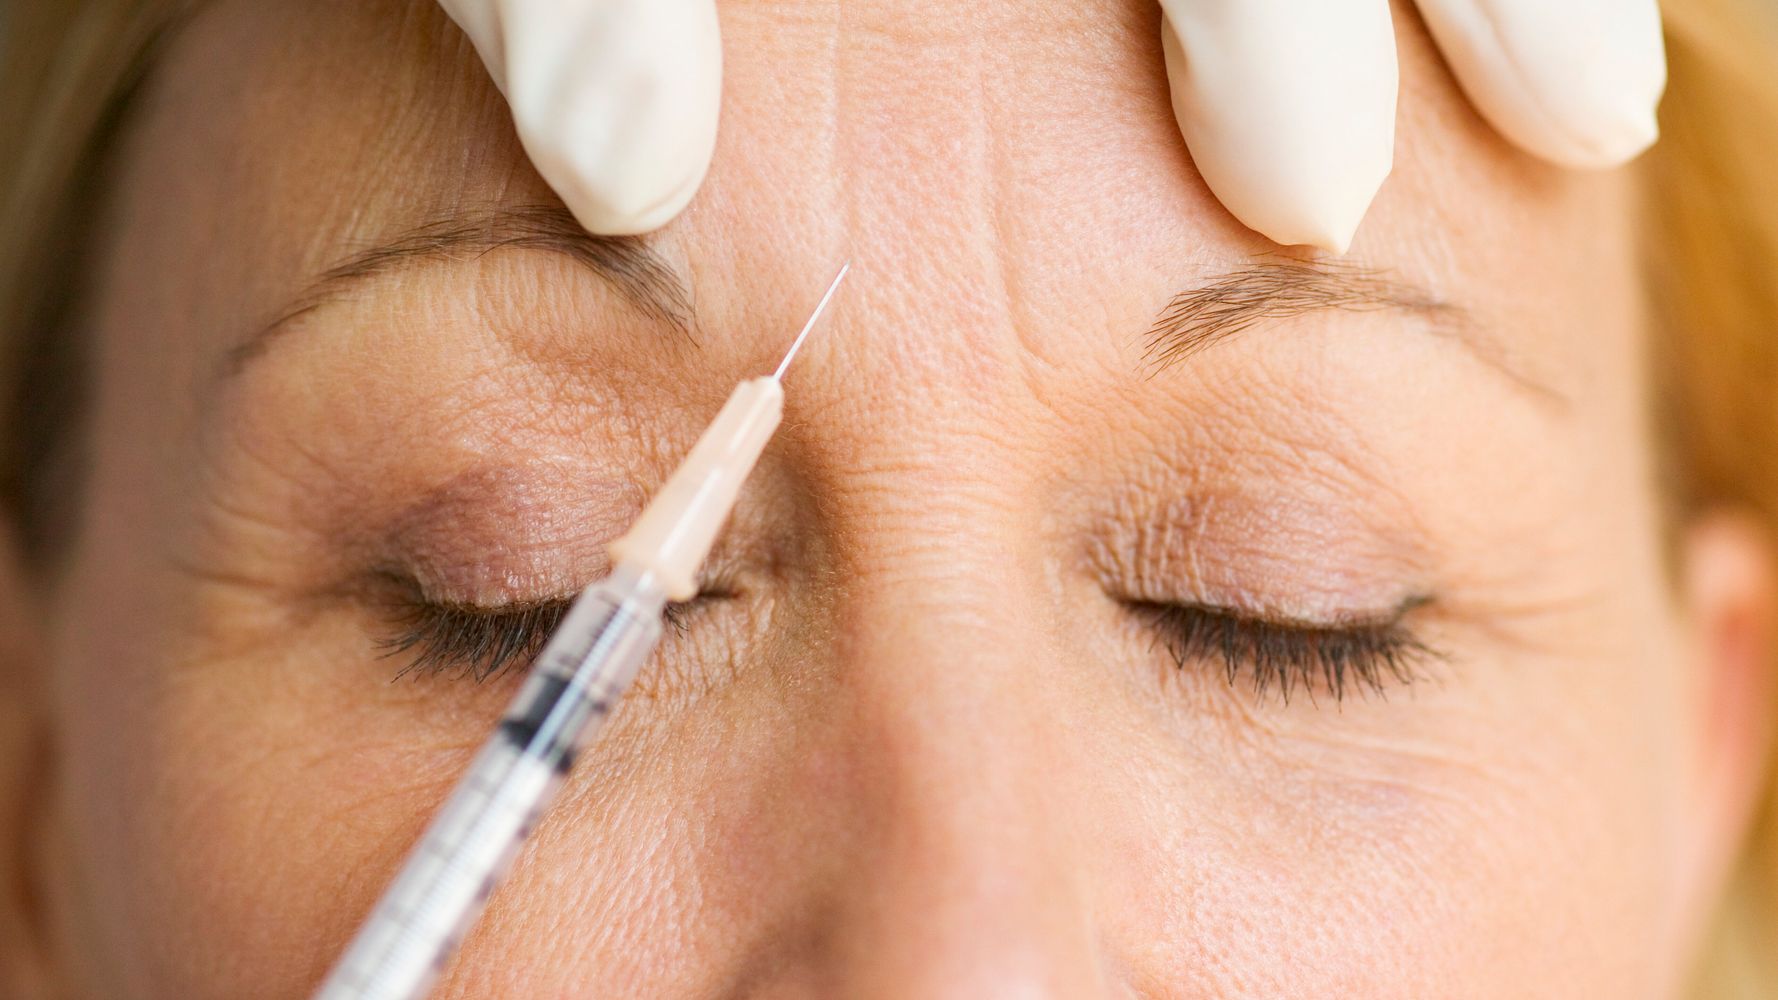 Should I Let My Botox Wear Off Completely?